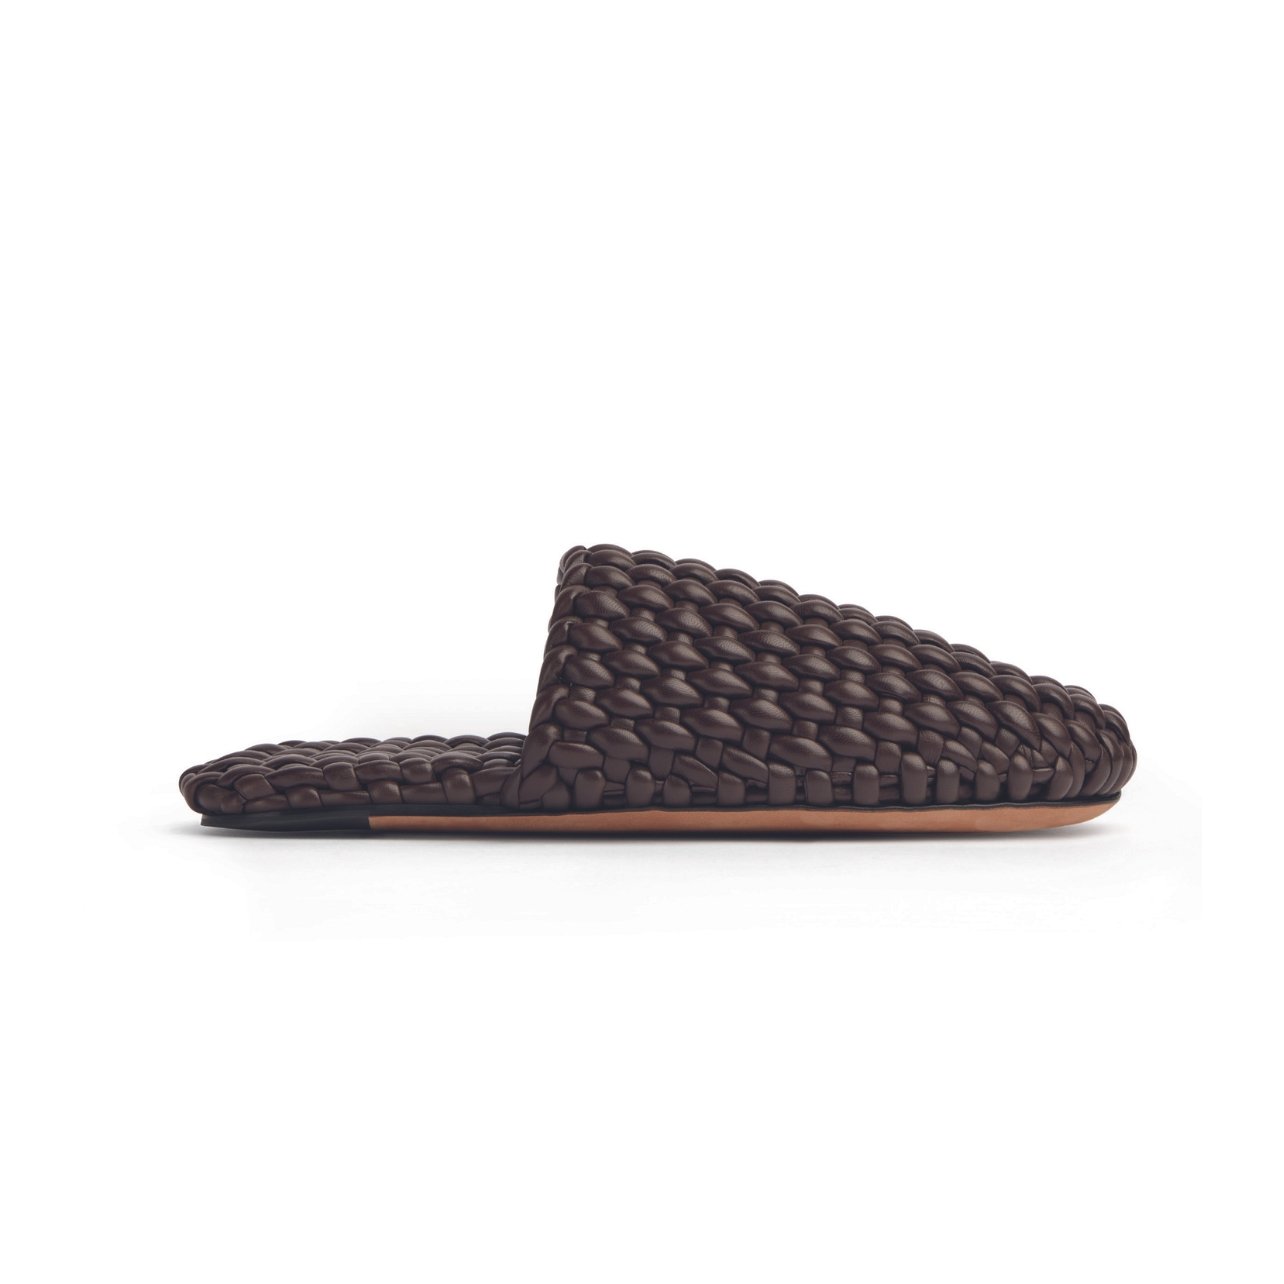 Brown woven leather slippers